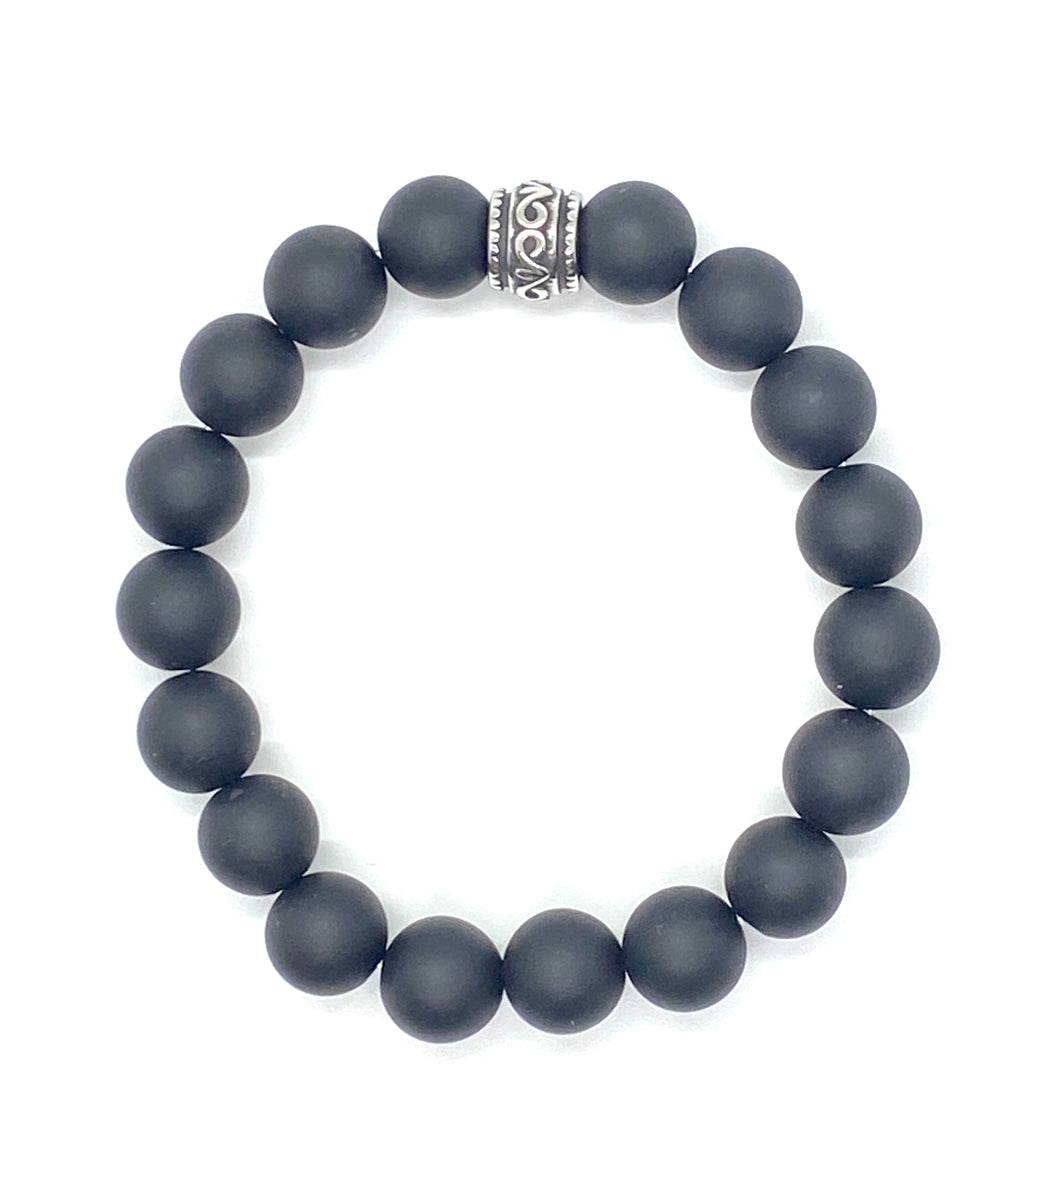 Matte Black 12 mm Onyx Gemstone bracelet with Stainless Steel Accent